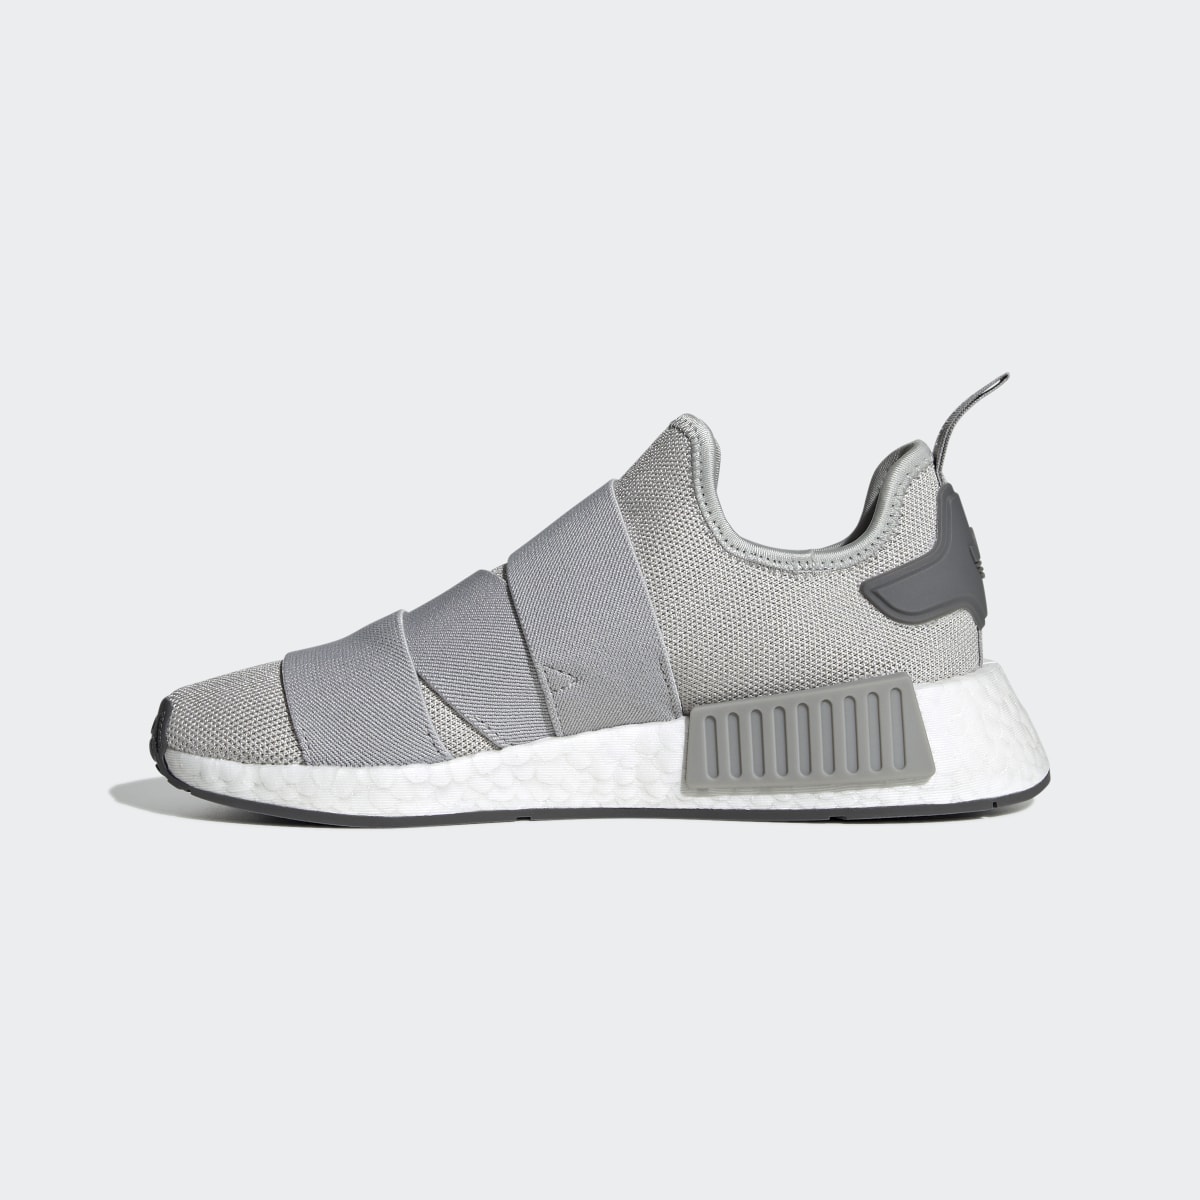 Adidas NMD_R1 Strap Shoes. 10